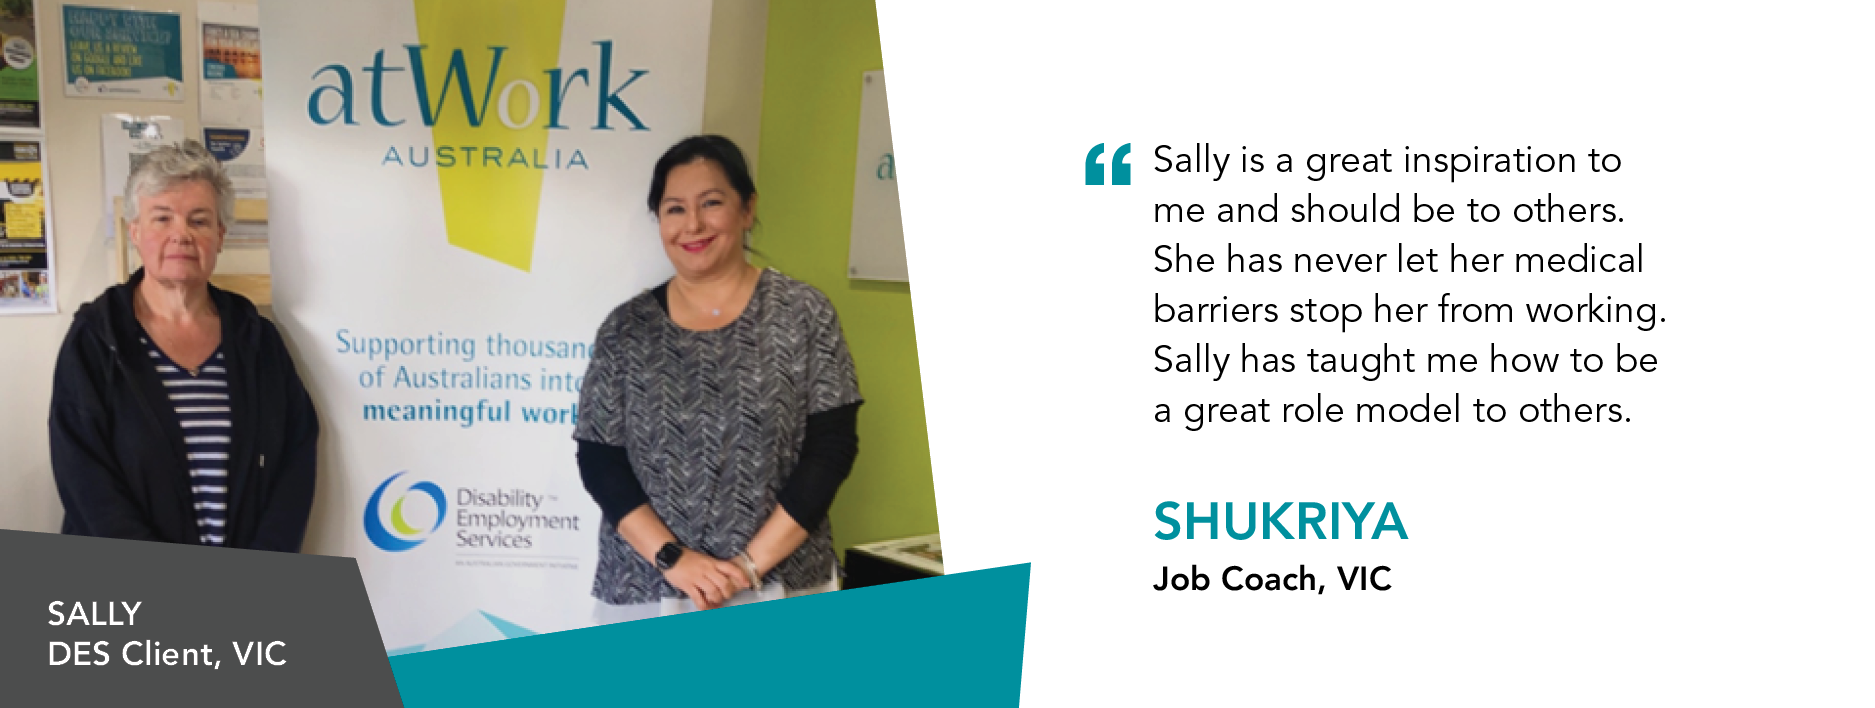 Quote reads: "Sally is a great inspiration to me and should be to others. She has never let her medical barriers stop her from working. Sally has taught me how to be a great role model to others." said Shukriya, Job Coach, VIC. 